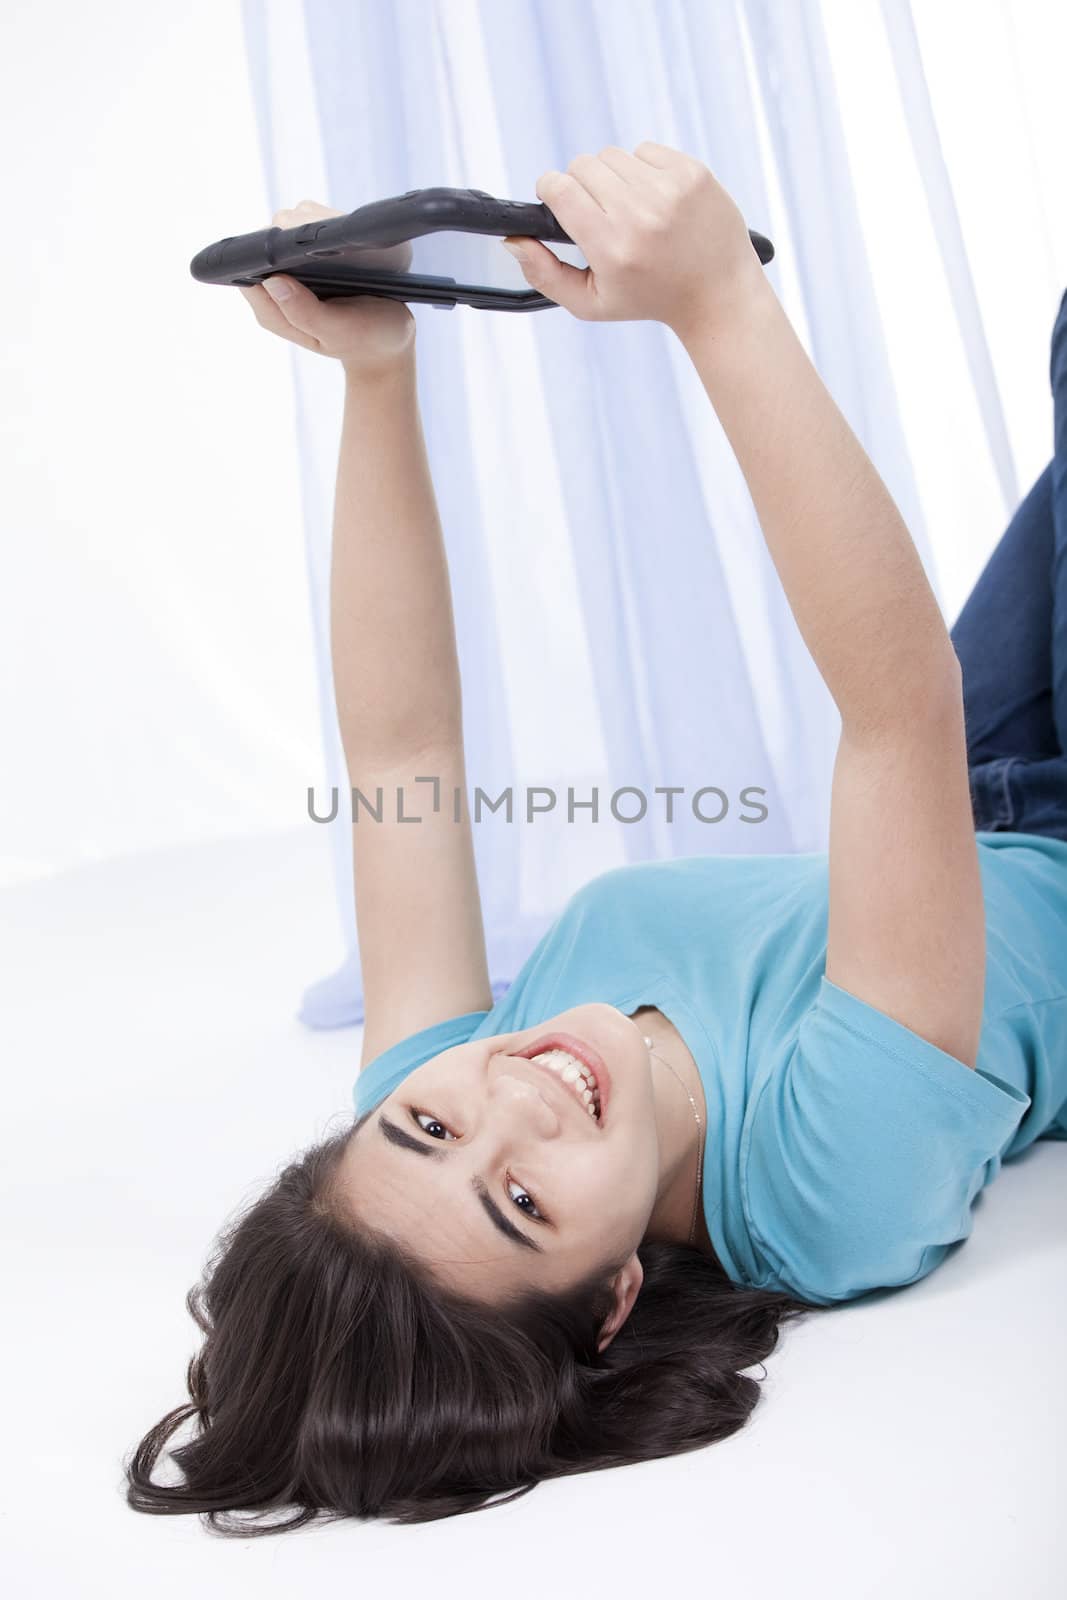 Biracial teen girl holding tablet computer up over head while relaxing on floor 